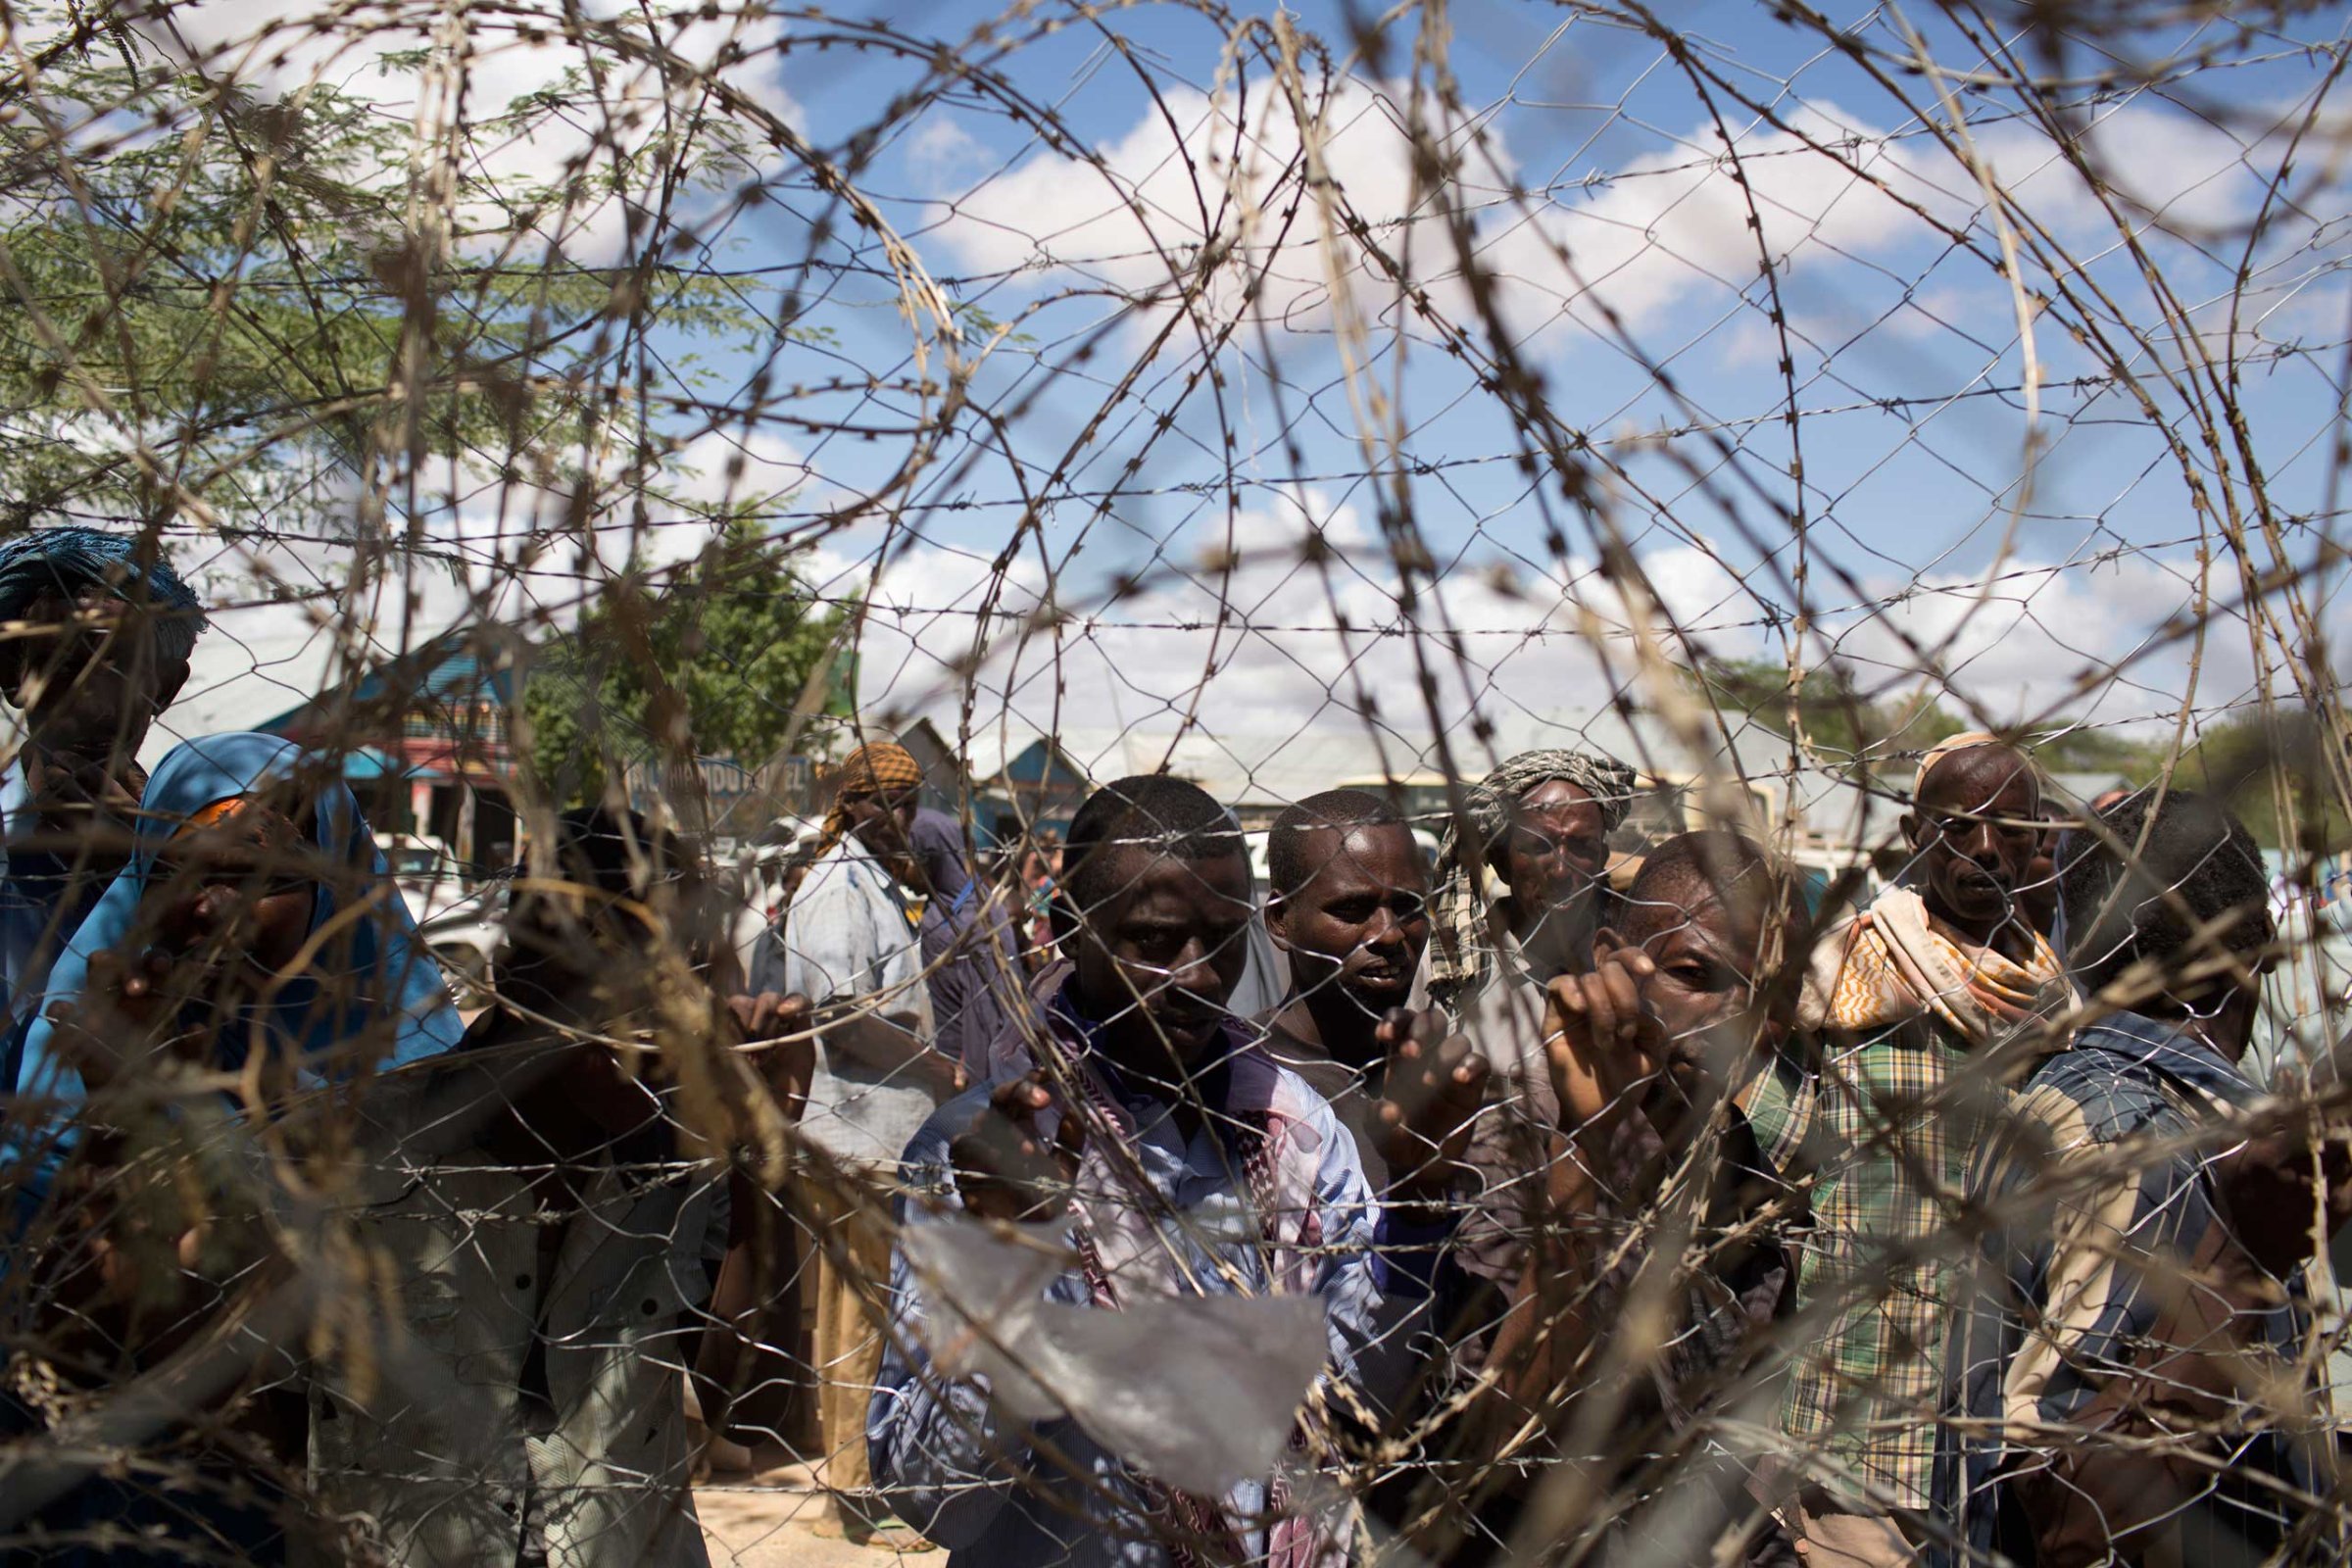 Somali refugees look through a barbwire fence in Dagahale, one of the several refugee settlements in Dadaab, Garissa County, northeastern Kenya in 2013.